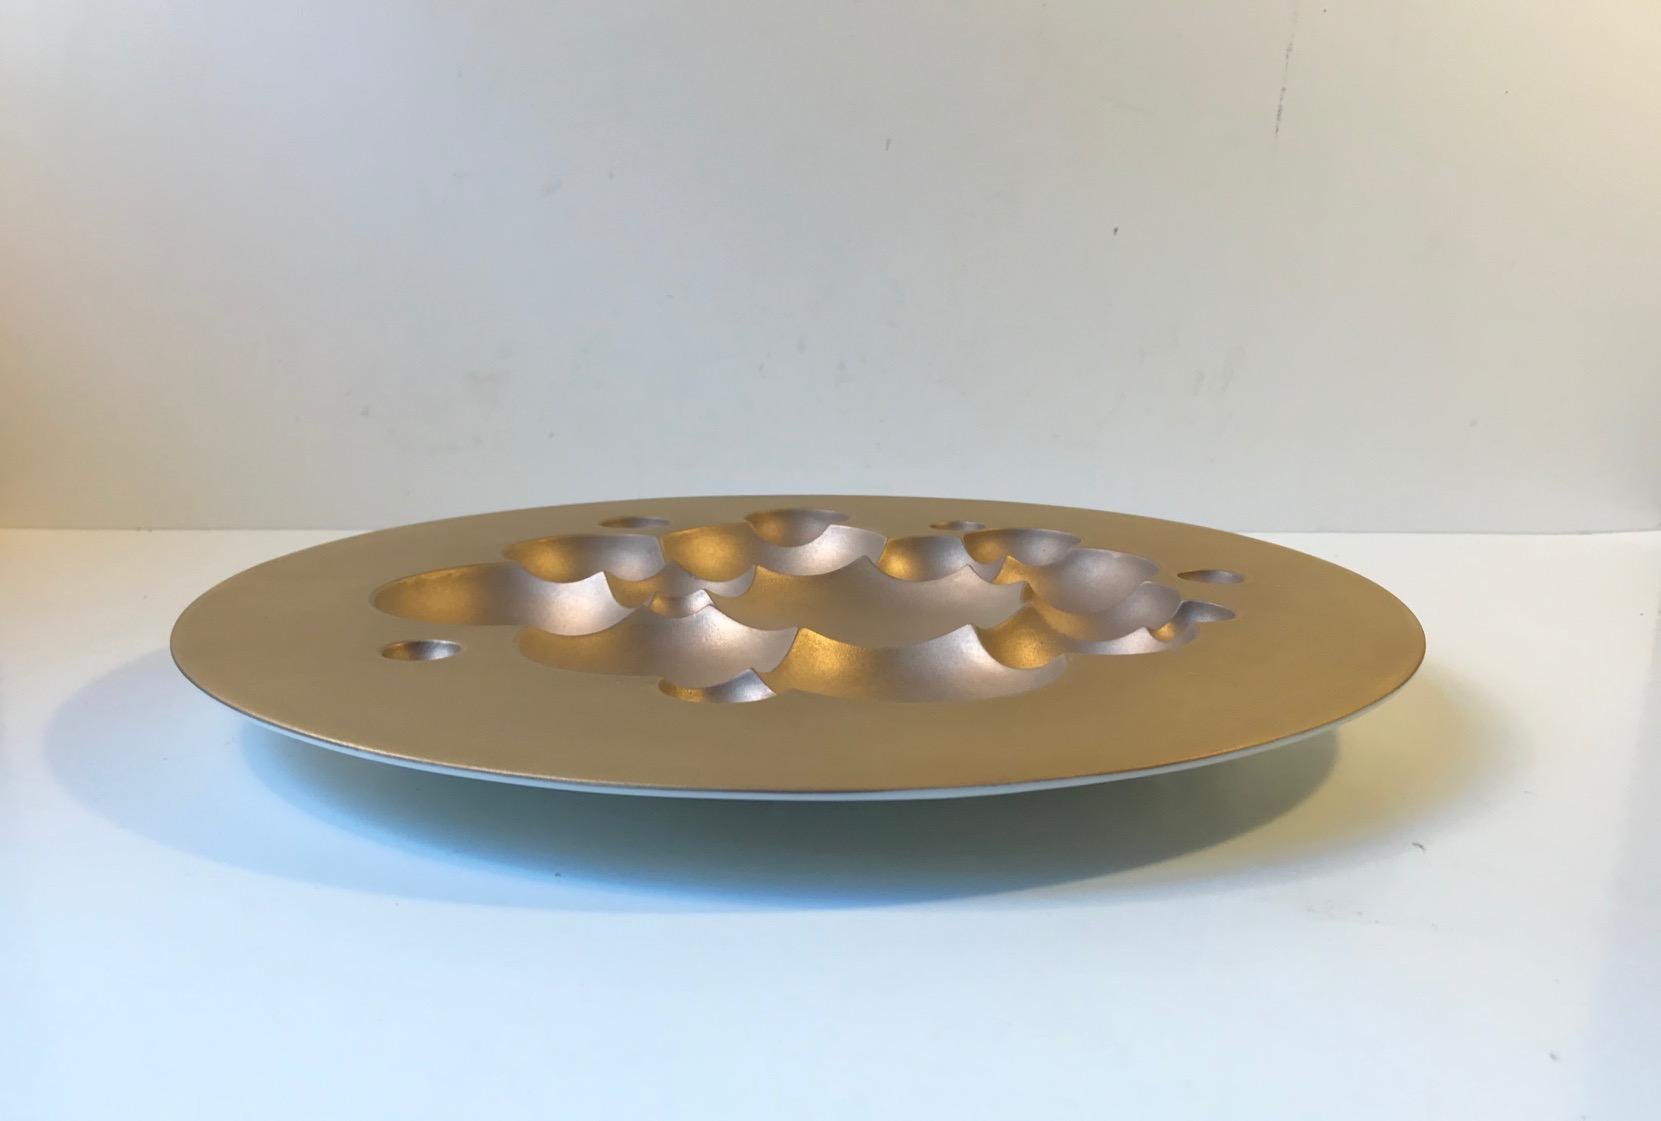 Round porcelain dish or wall plaque with bubbles in reverso. Gilt-glazed top surface. It was designed by Tapio Wirkkala and manufactured by Rosenthal Studio Line in 1971 in a limited edition of 3,000. This is number 2694. The Jahresteller series